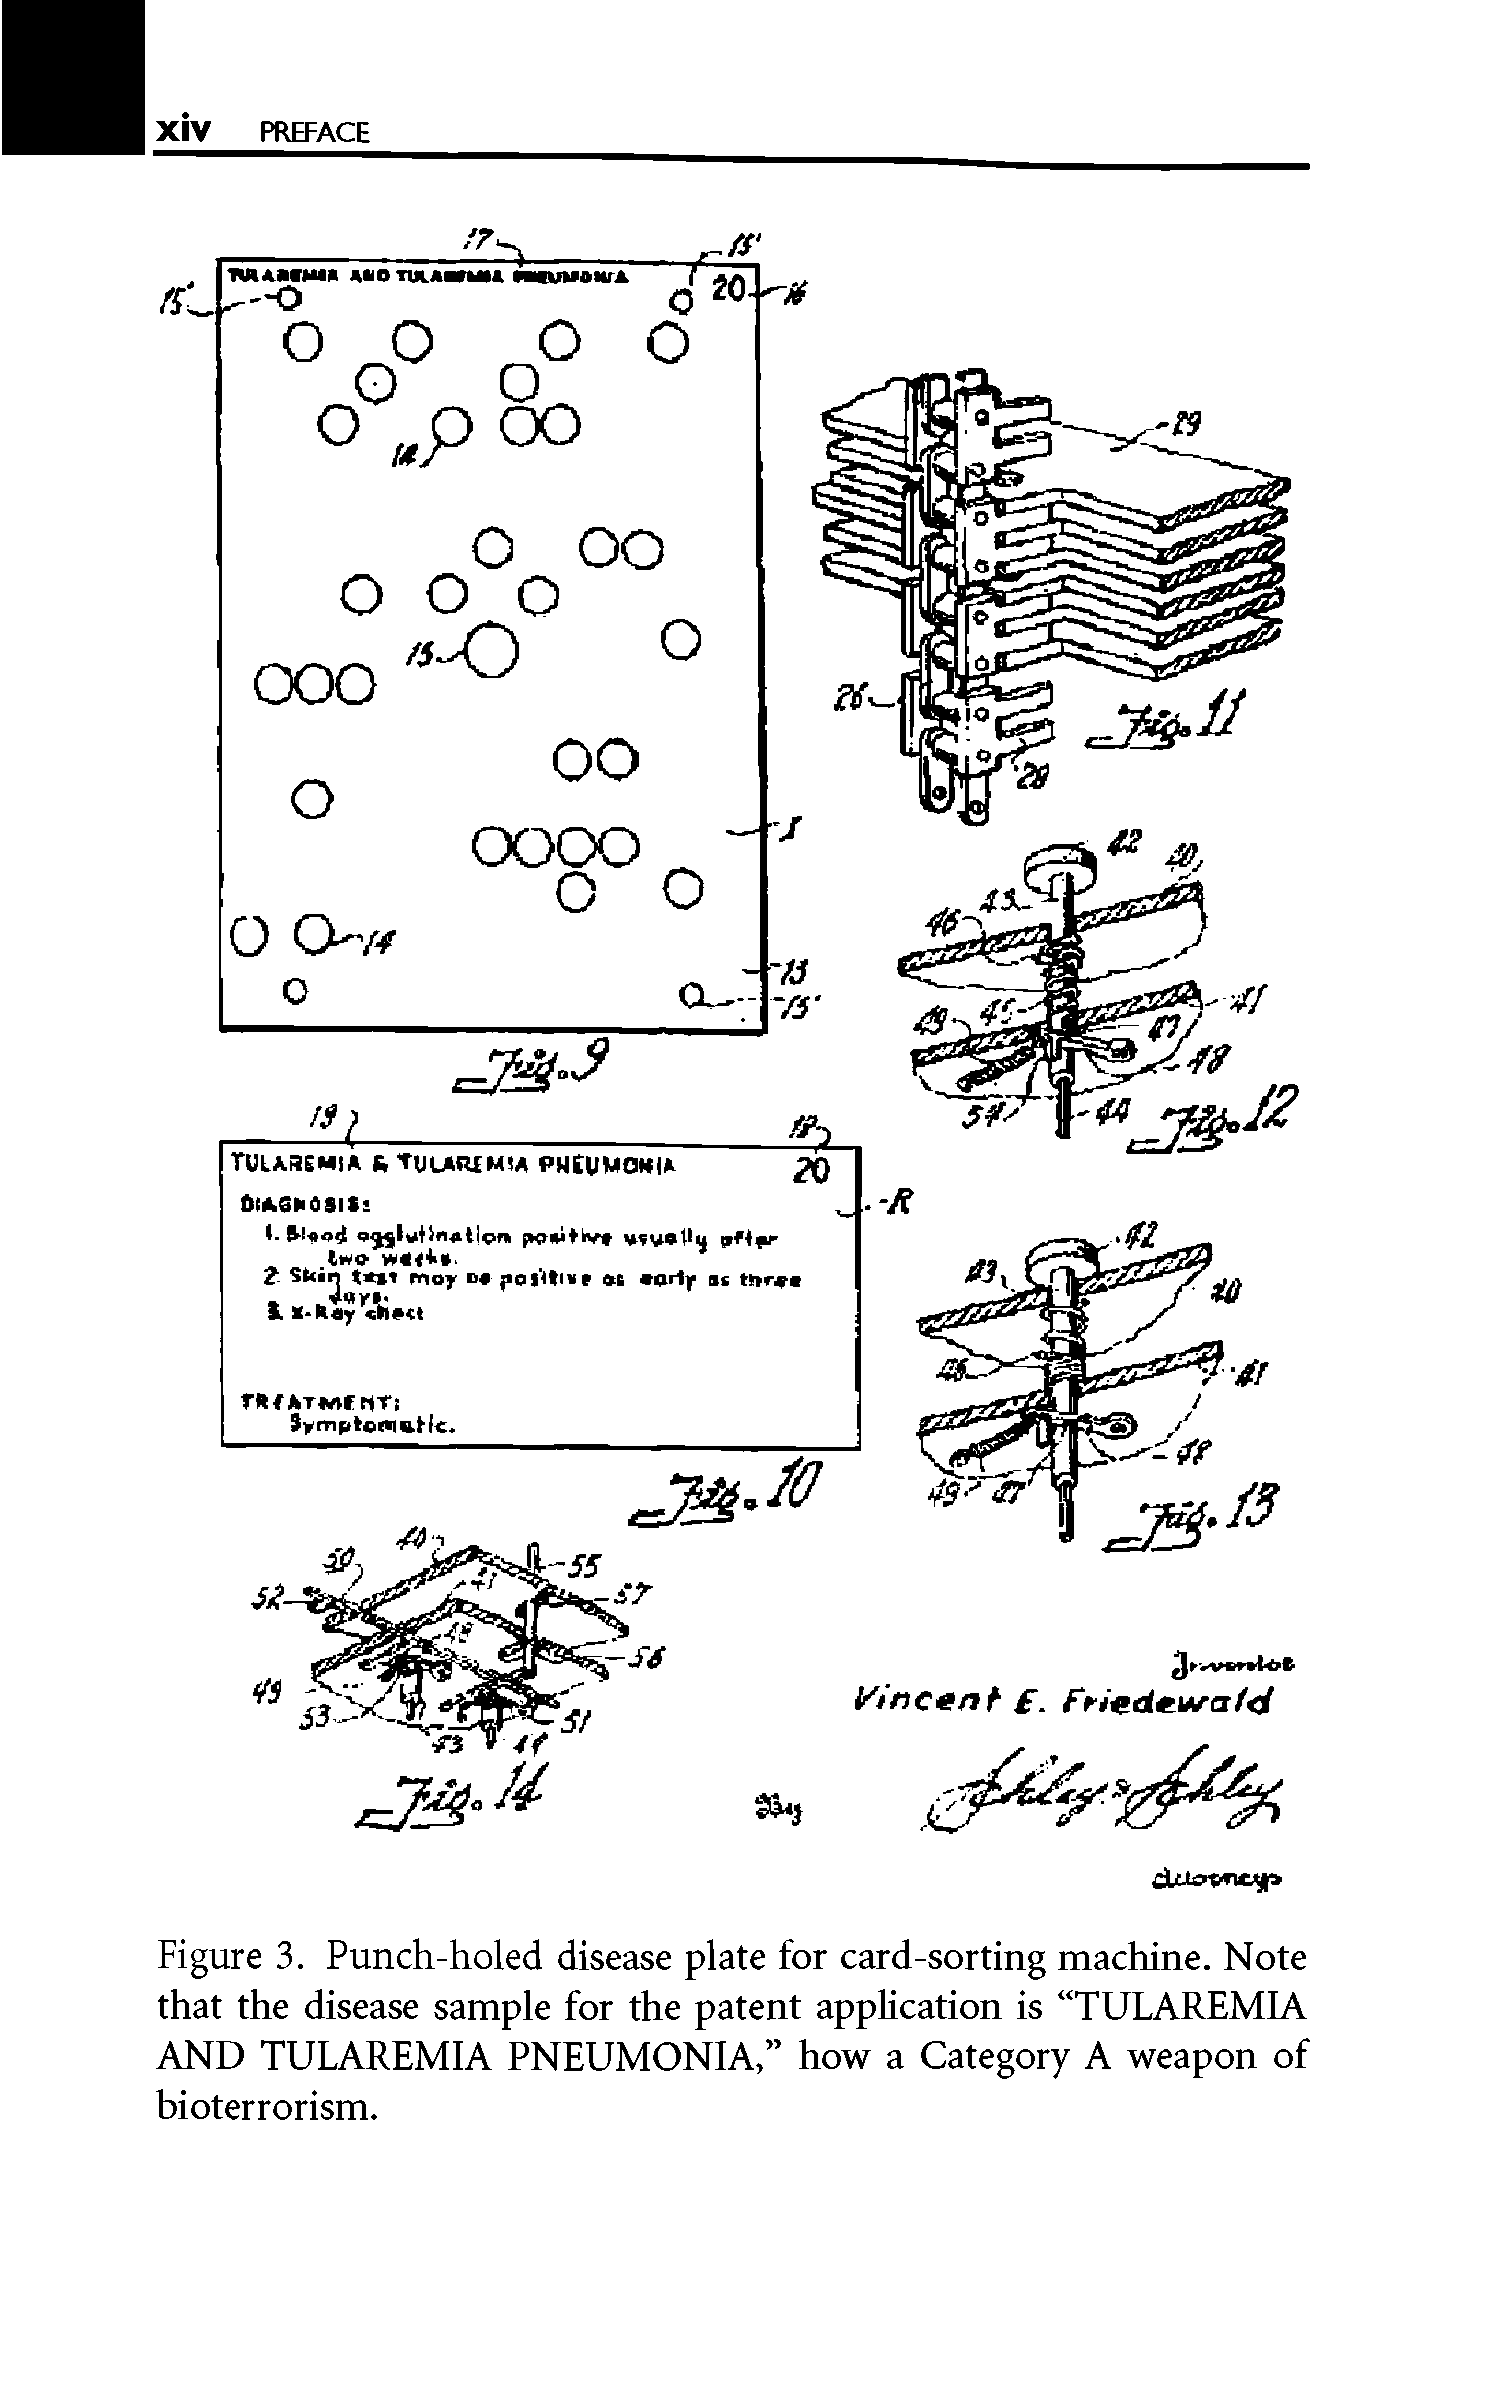 Figure 3. Punch-holed disease plate for card-sorting machine. Note that the disease sample for the patent application is TULAREMIA AND TULAREMIA PNEUMONIA, how a Category A weapon of bioterrorism.